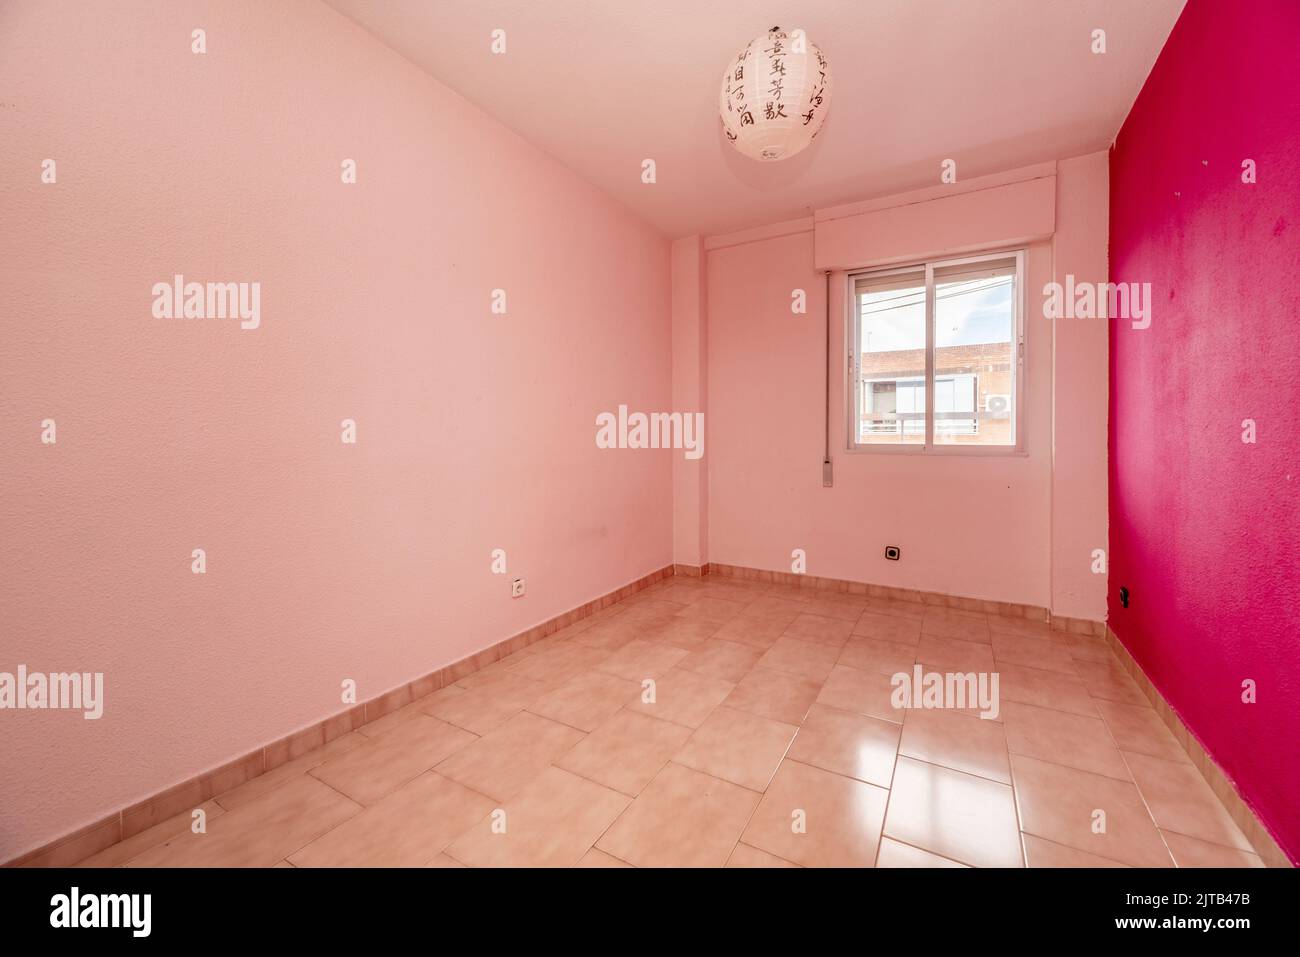 Empty living room in a residential house with stoneware floors and walls painted in various shades of pink Stock Photo